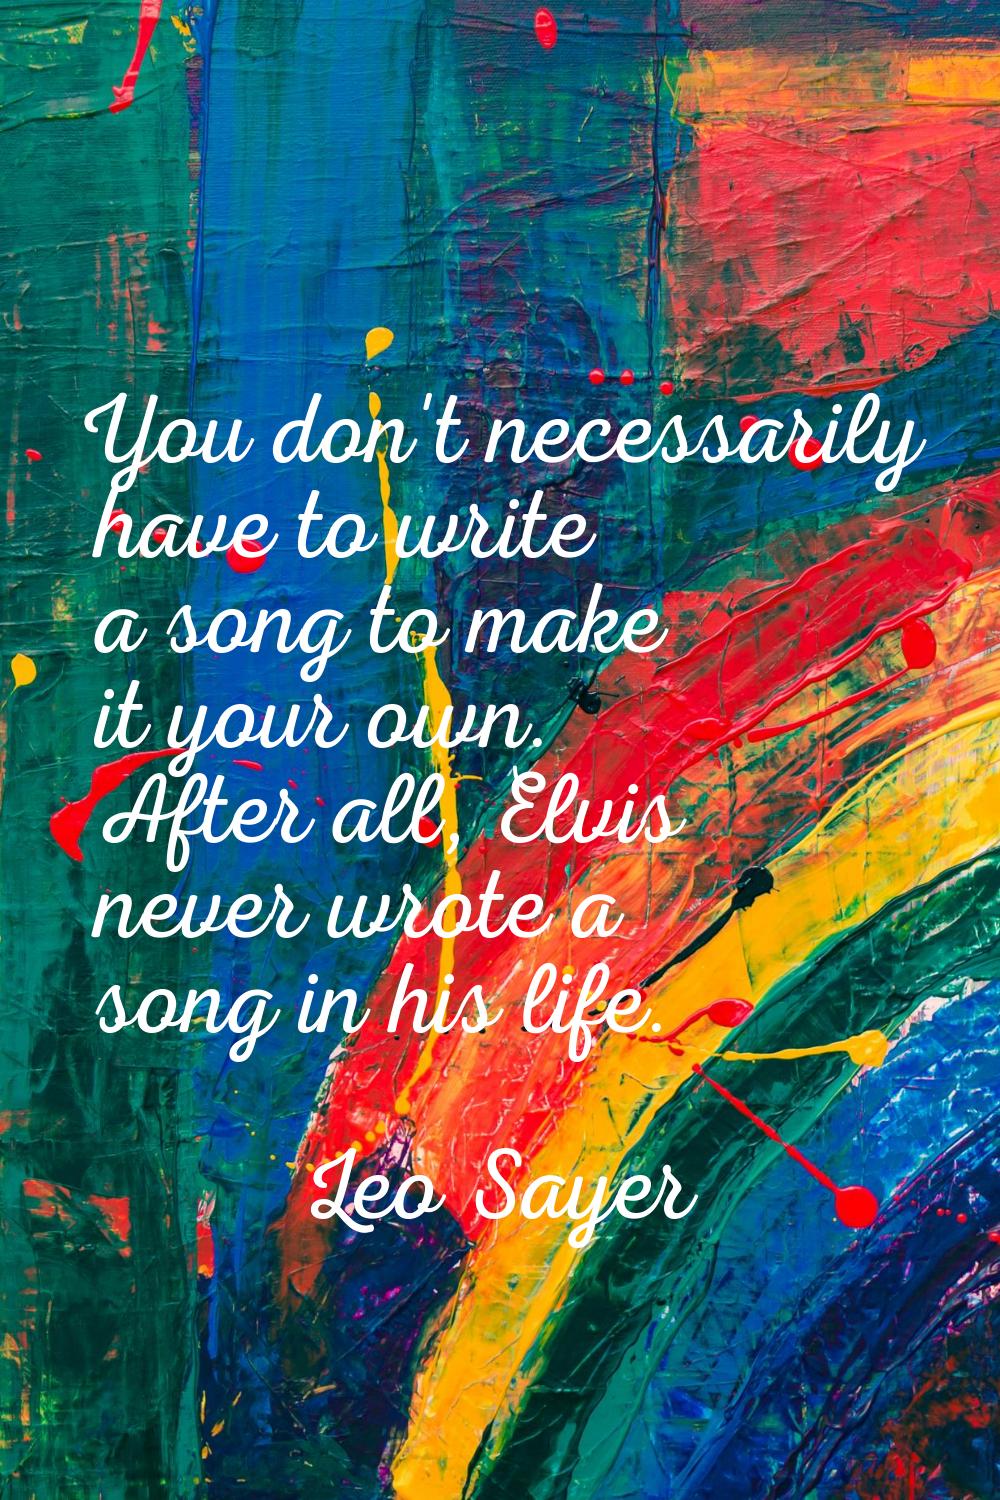 You don't necessarily have to write a song to make it your own. After all, Elvis never wrote a song